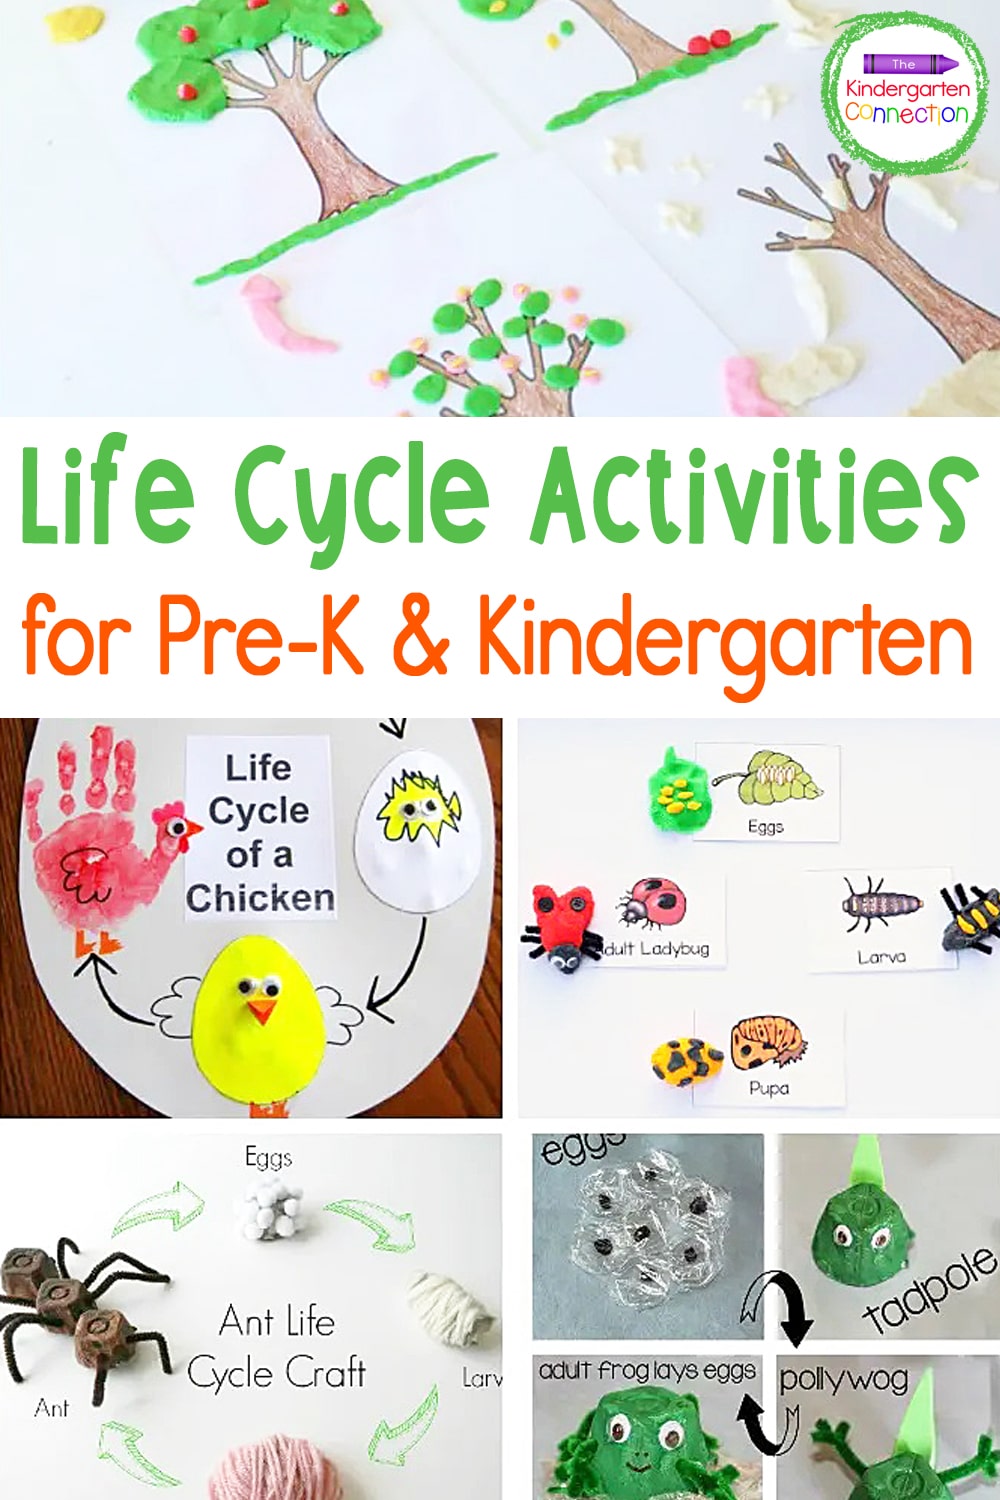 Learn about the life cycle of a plant, life cycles of animals, and so much more with these engaging Life Cycle Activities for Kids!